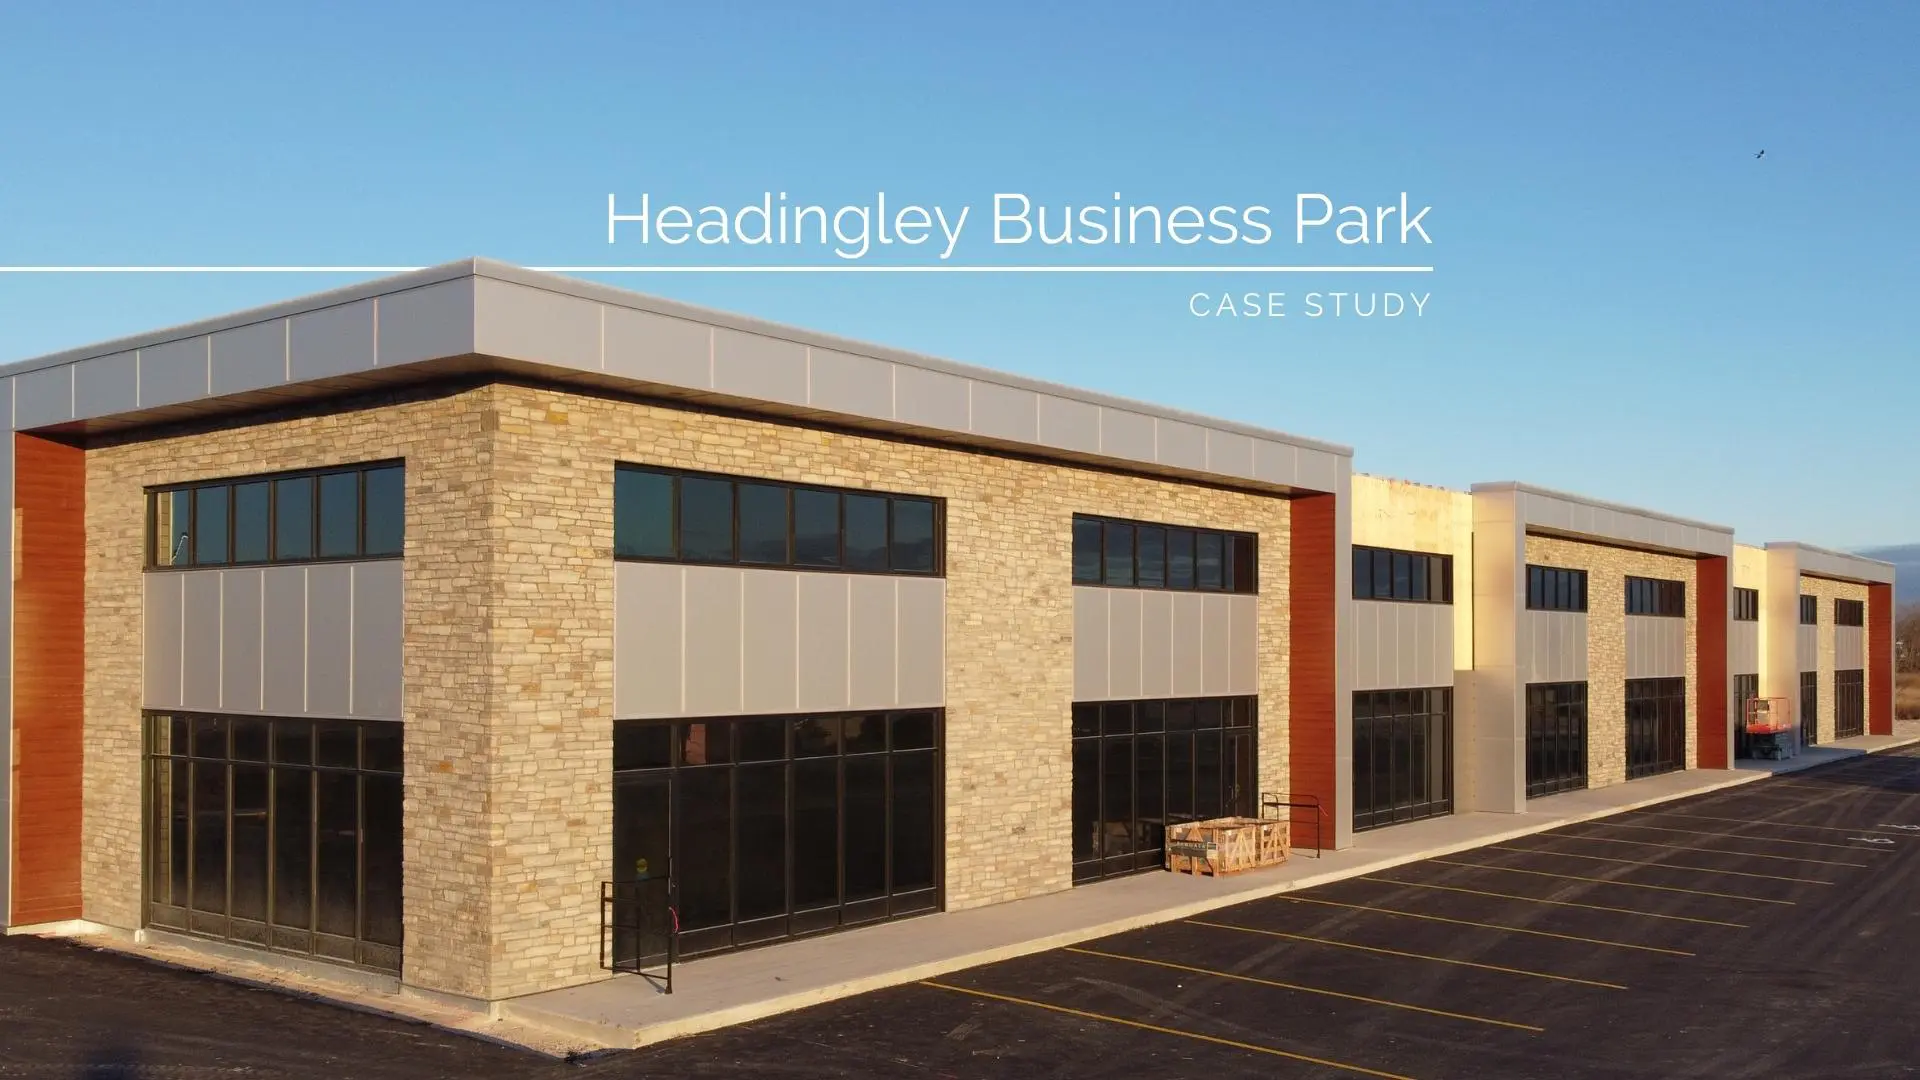 Headingley Business Park QuickPanel and FastPlank Commercial